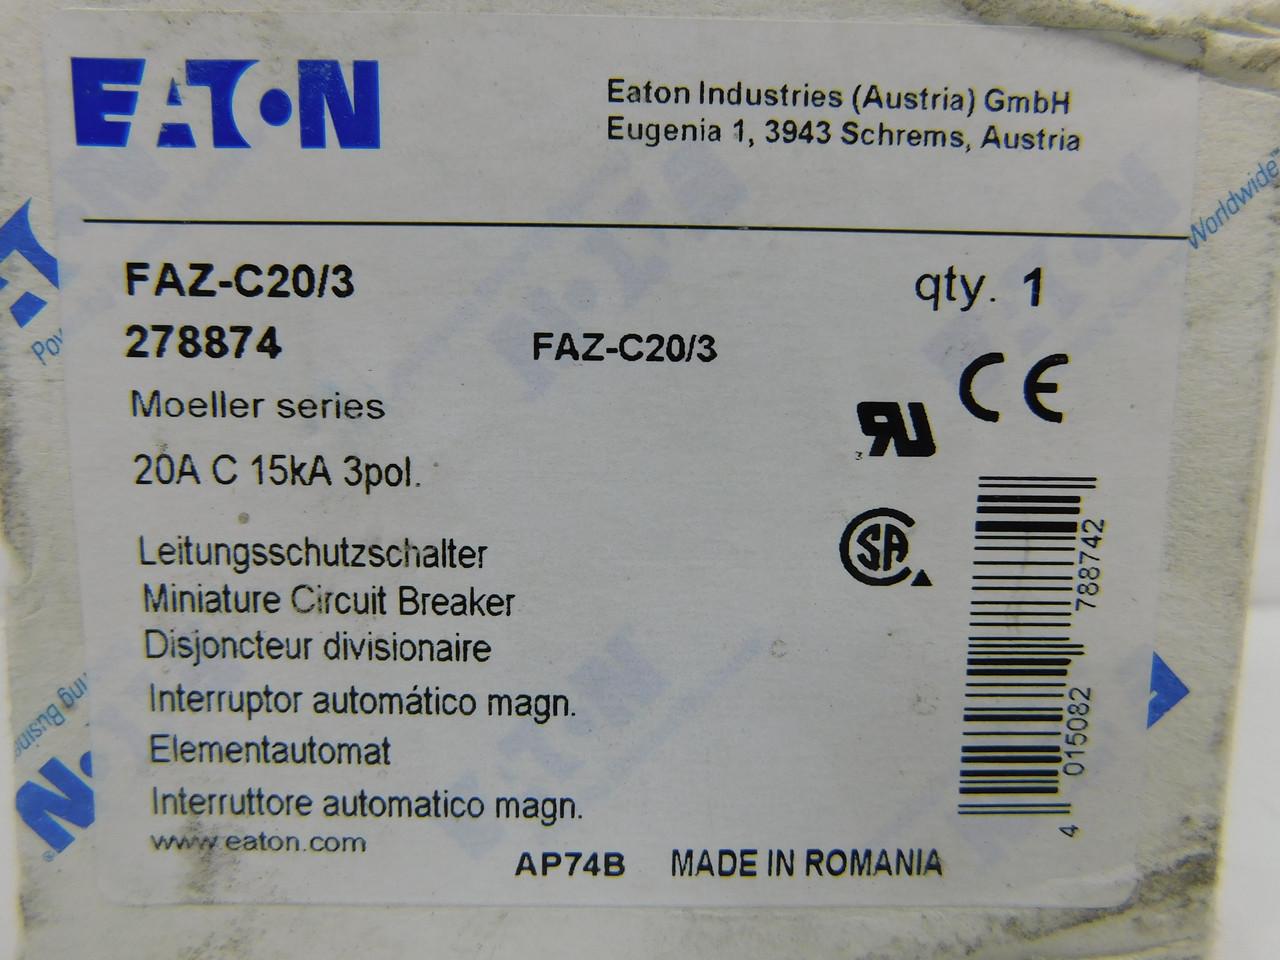 Eaton FAZ-C20/3 Eaton FAZ supplementary protector,UL 1077 Industrial miniature circuit breaker - supplementary protector,Medium levels of inrush current are expected,20 A,15 kAIC,Three-pole,5-10X /n,50-60 Hz,Standard terminals,C Curve